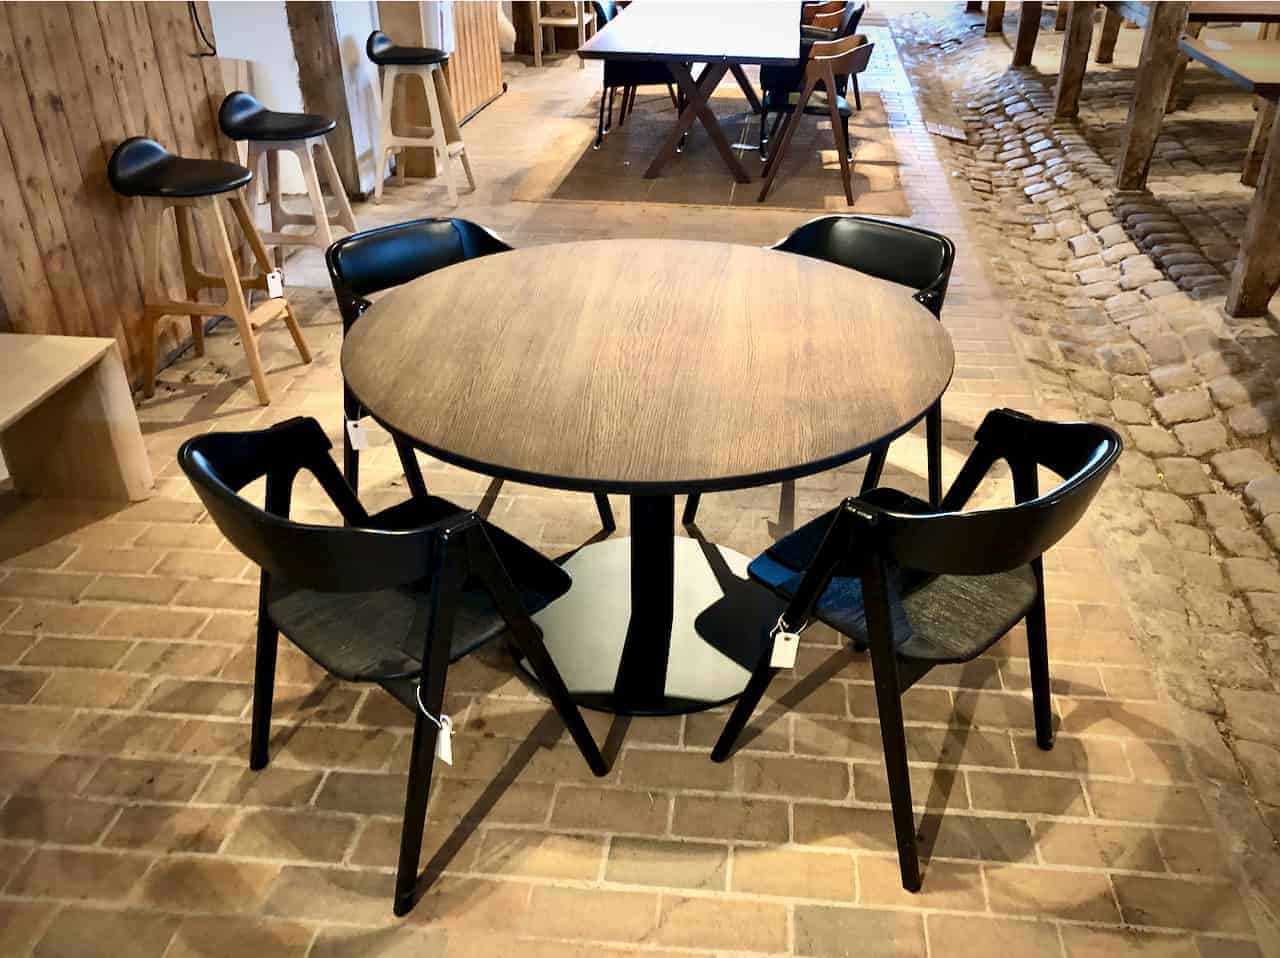 kaerbygaard Round table Round tables August 2020 8